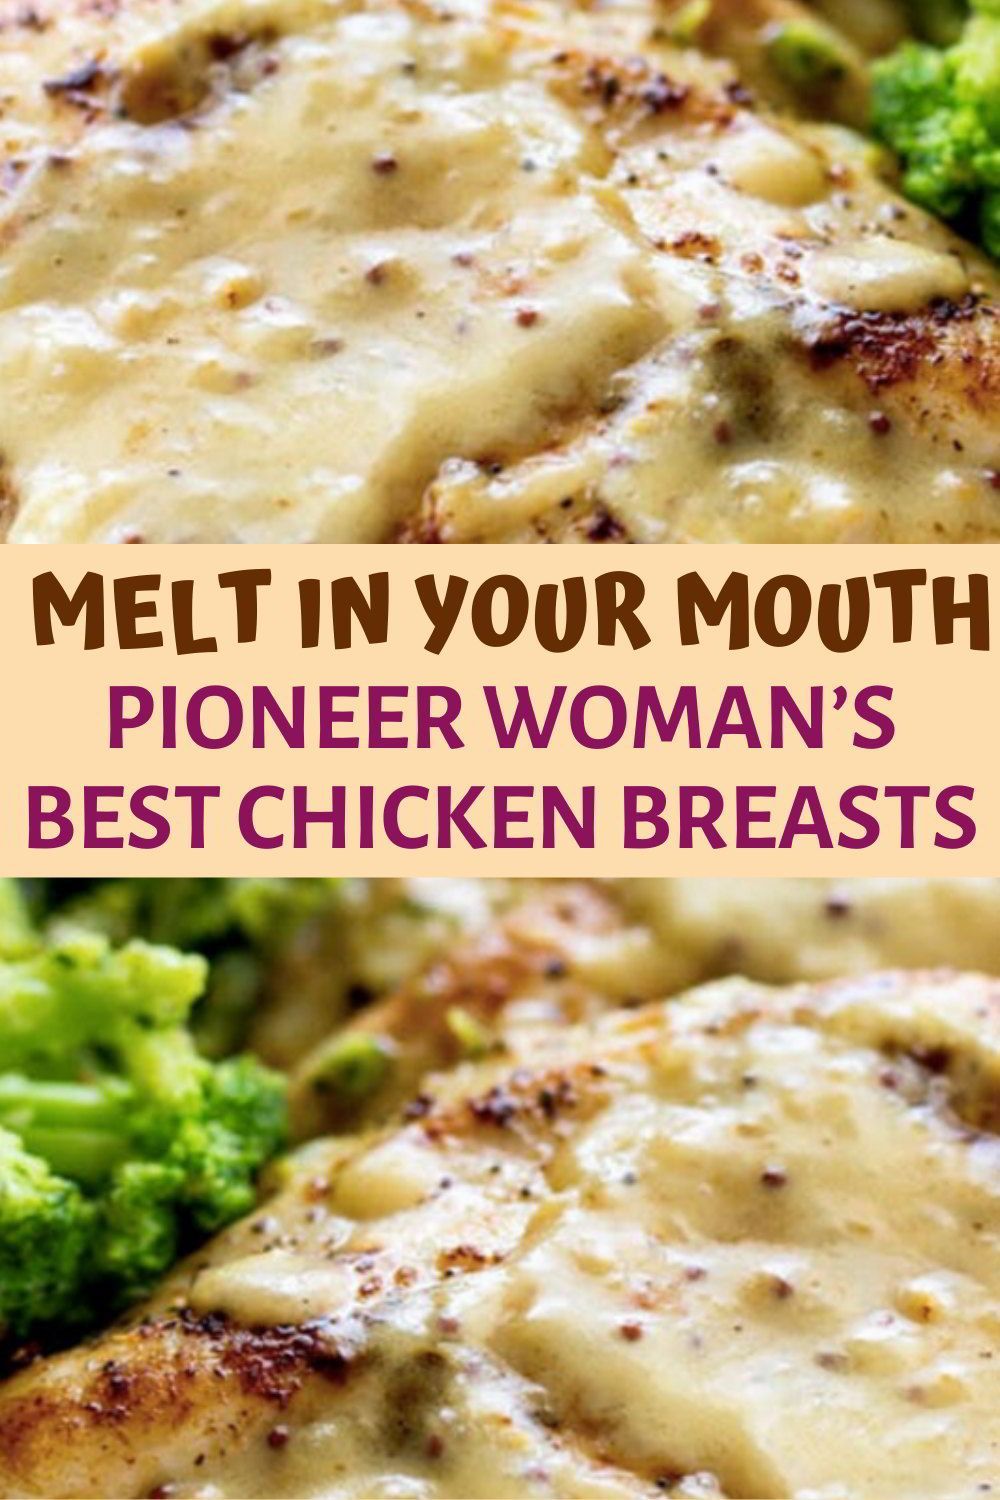 Pioneer Woman's Best Chicken Breasts -   25 dinner recipes for family main dishes chicken breasts ideas